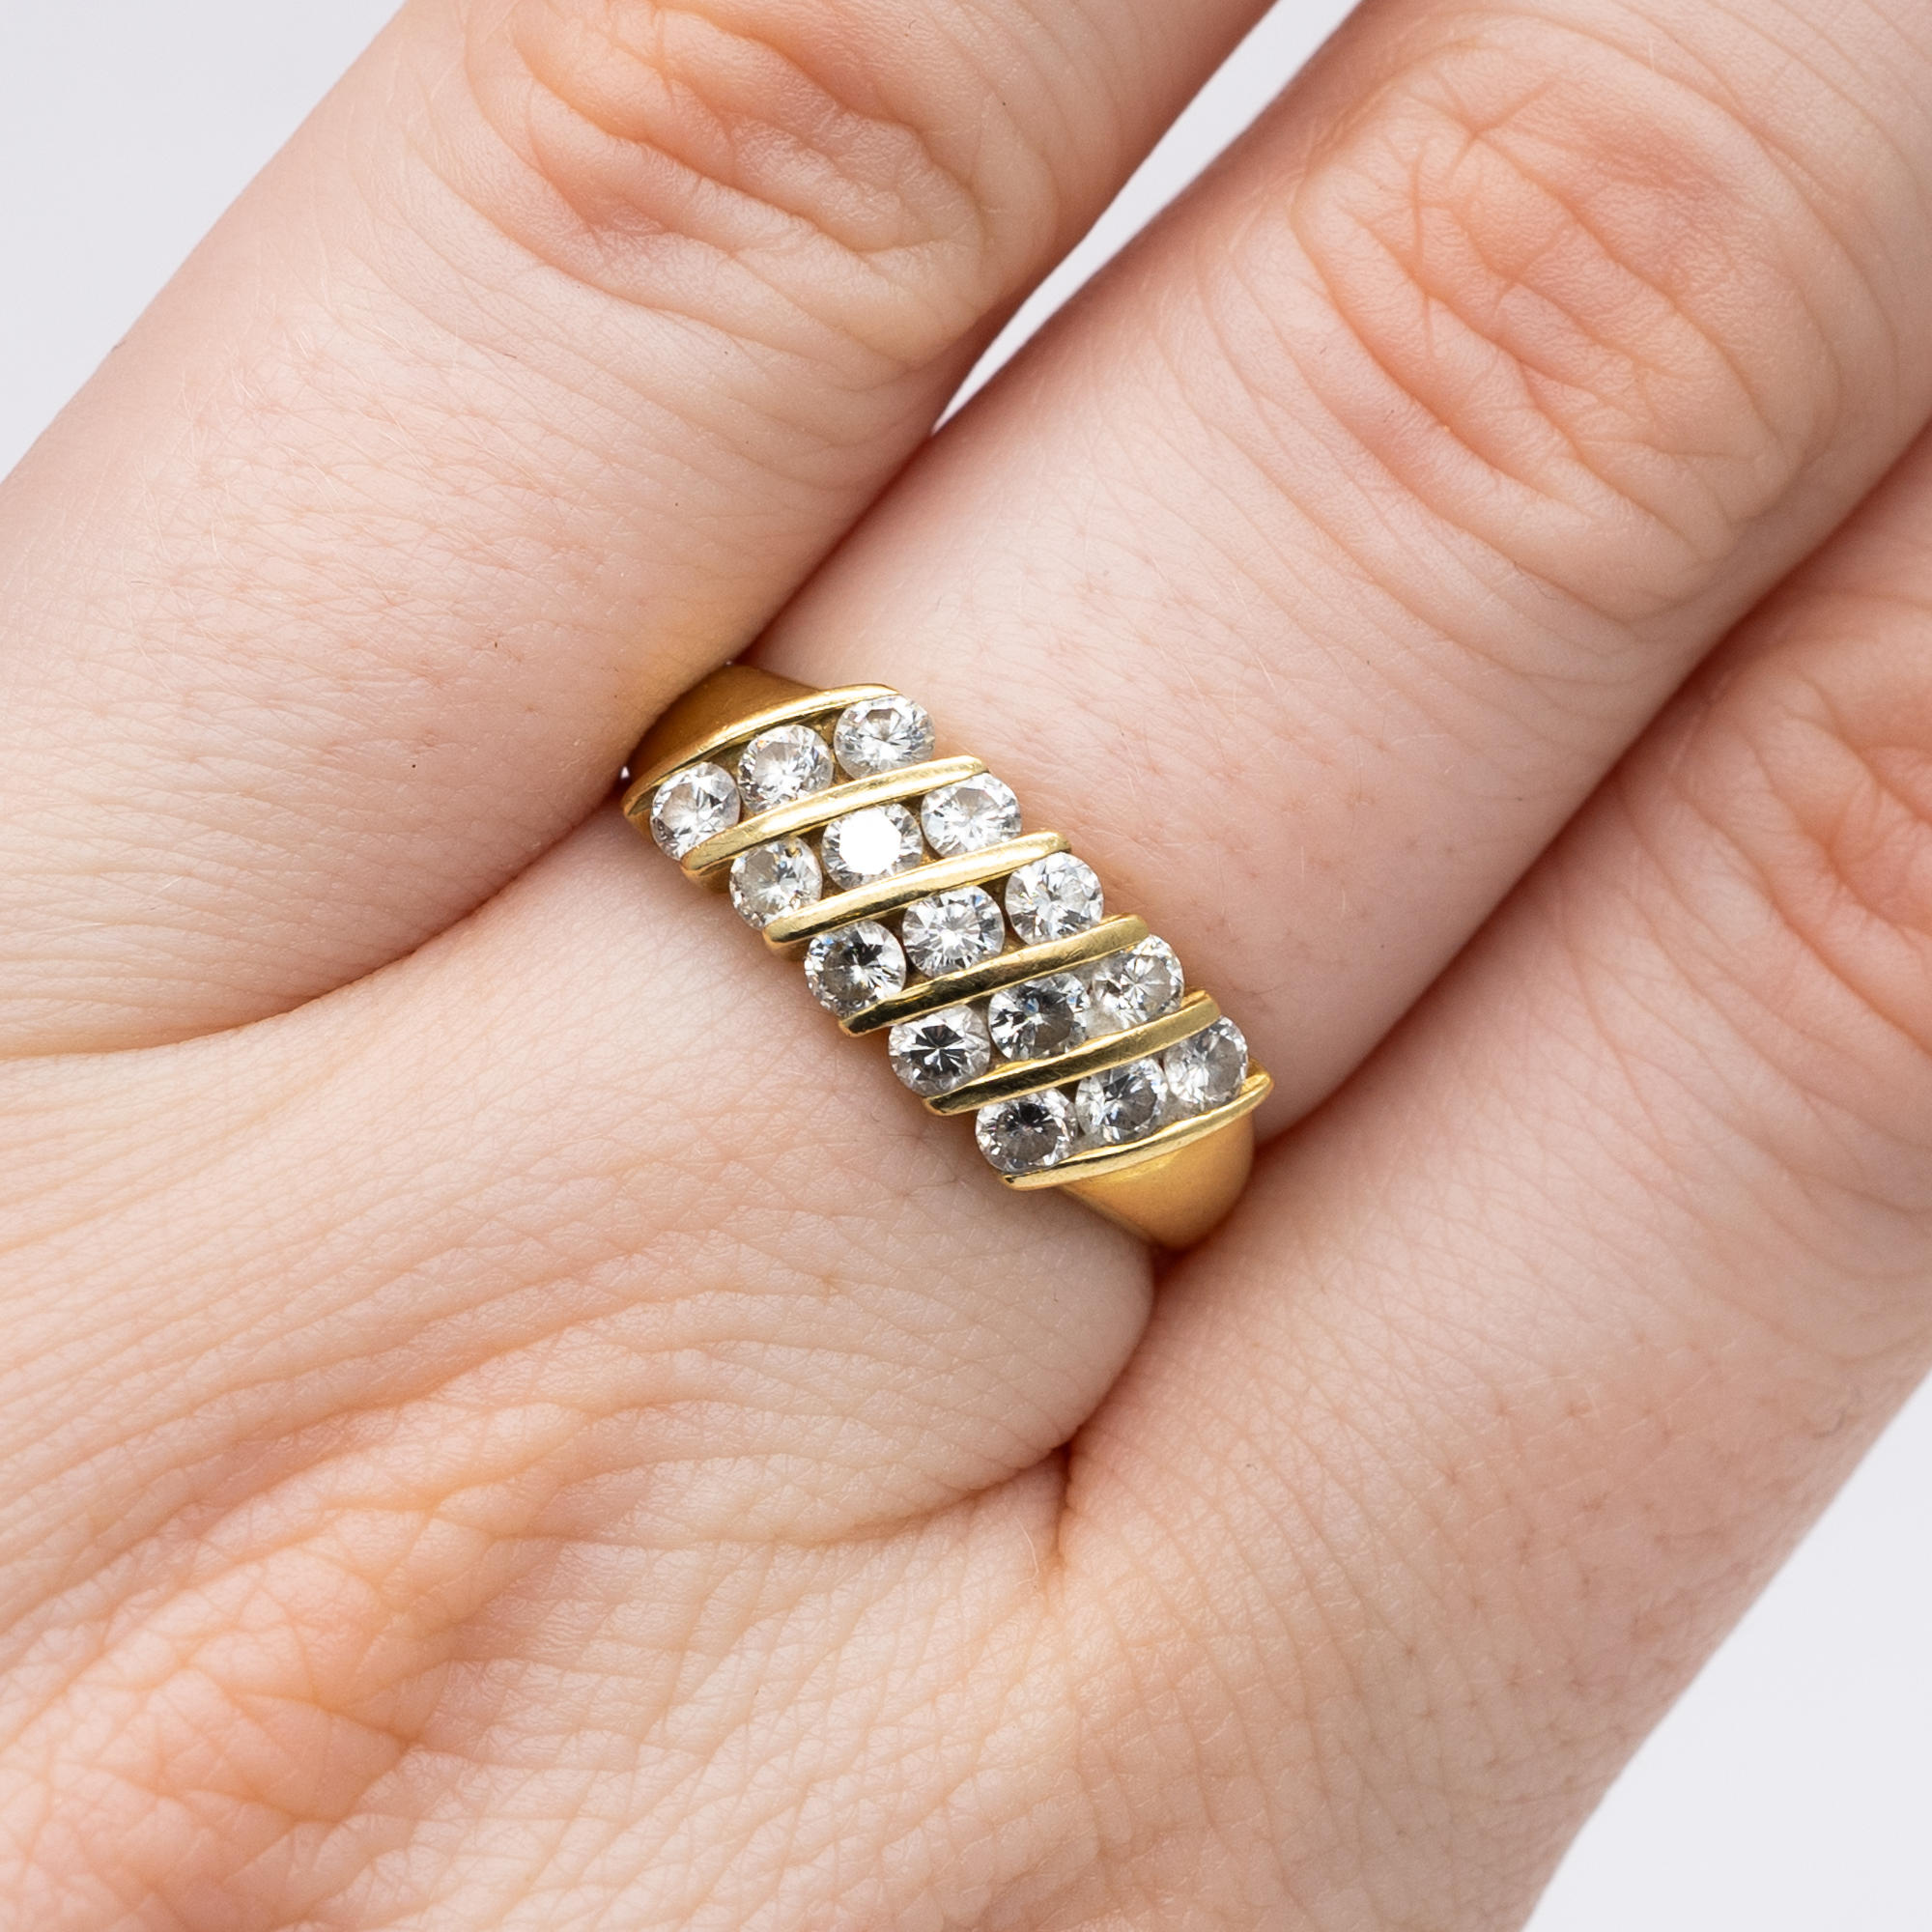 An 18ct yellow gold diamond ring - Image 5 of 6